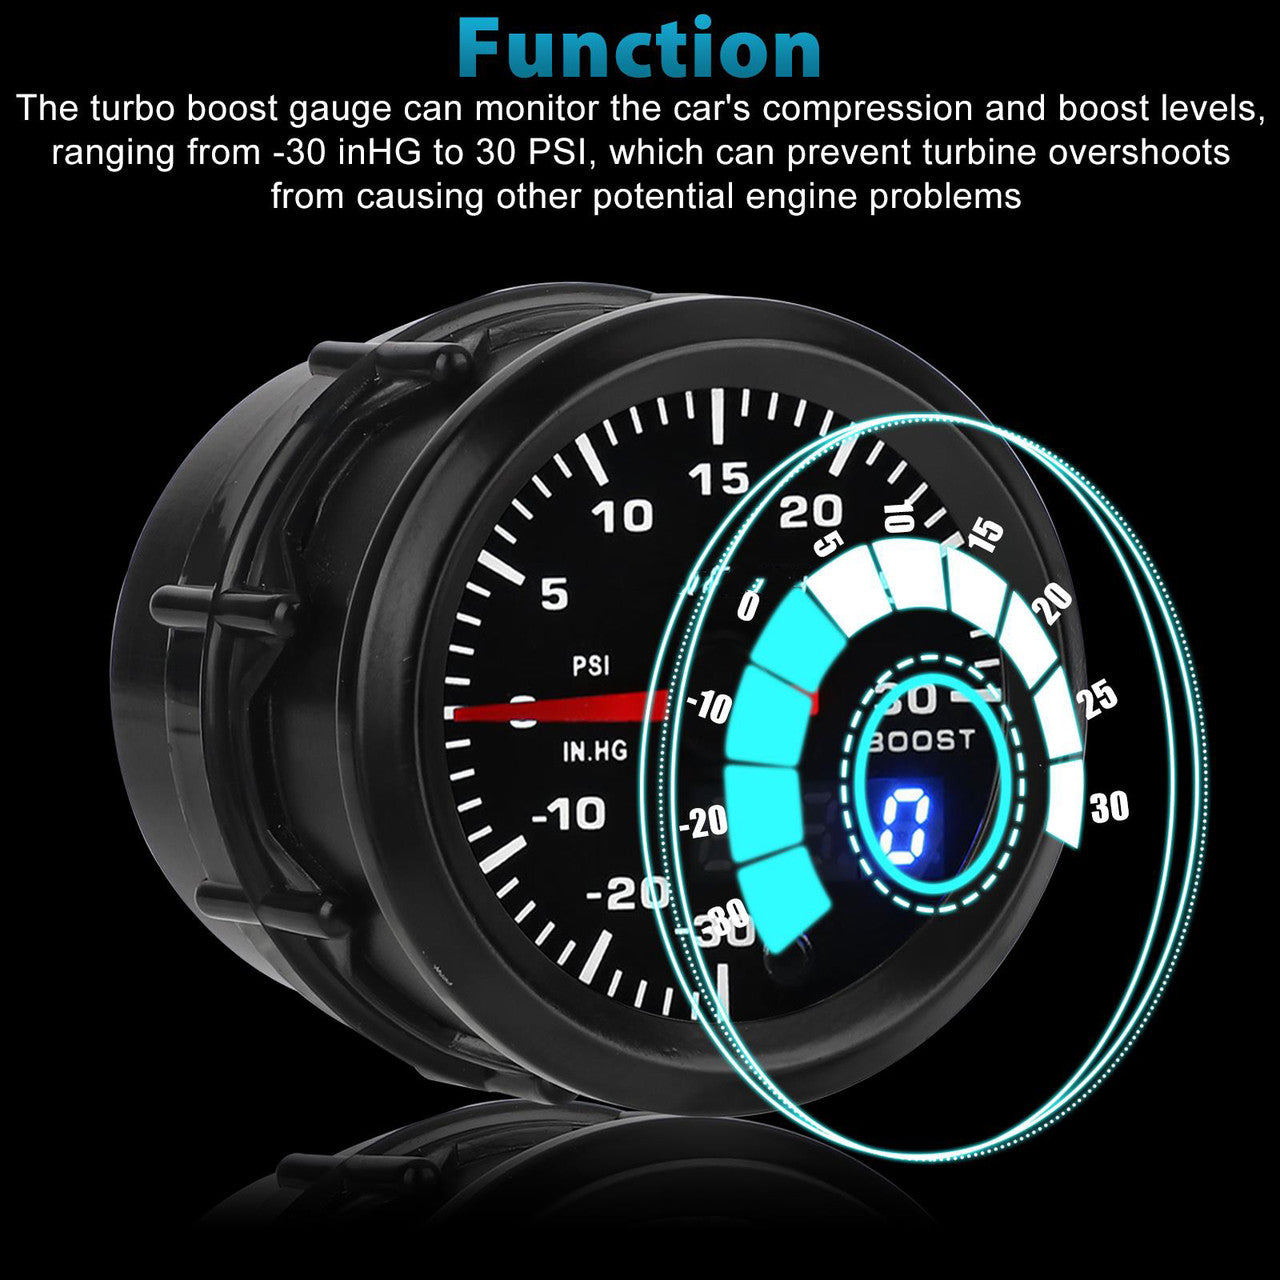 52mm LED Car Turbo Boost Meter - With 7 Color Universal Auto Car Gauge Kit for all 12V cars (Black)